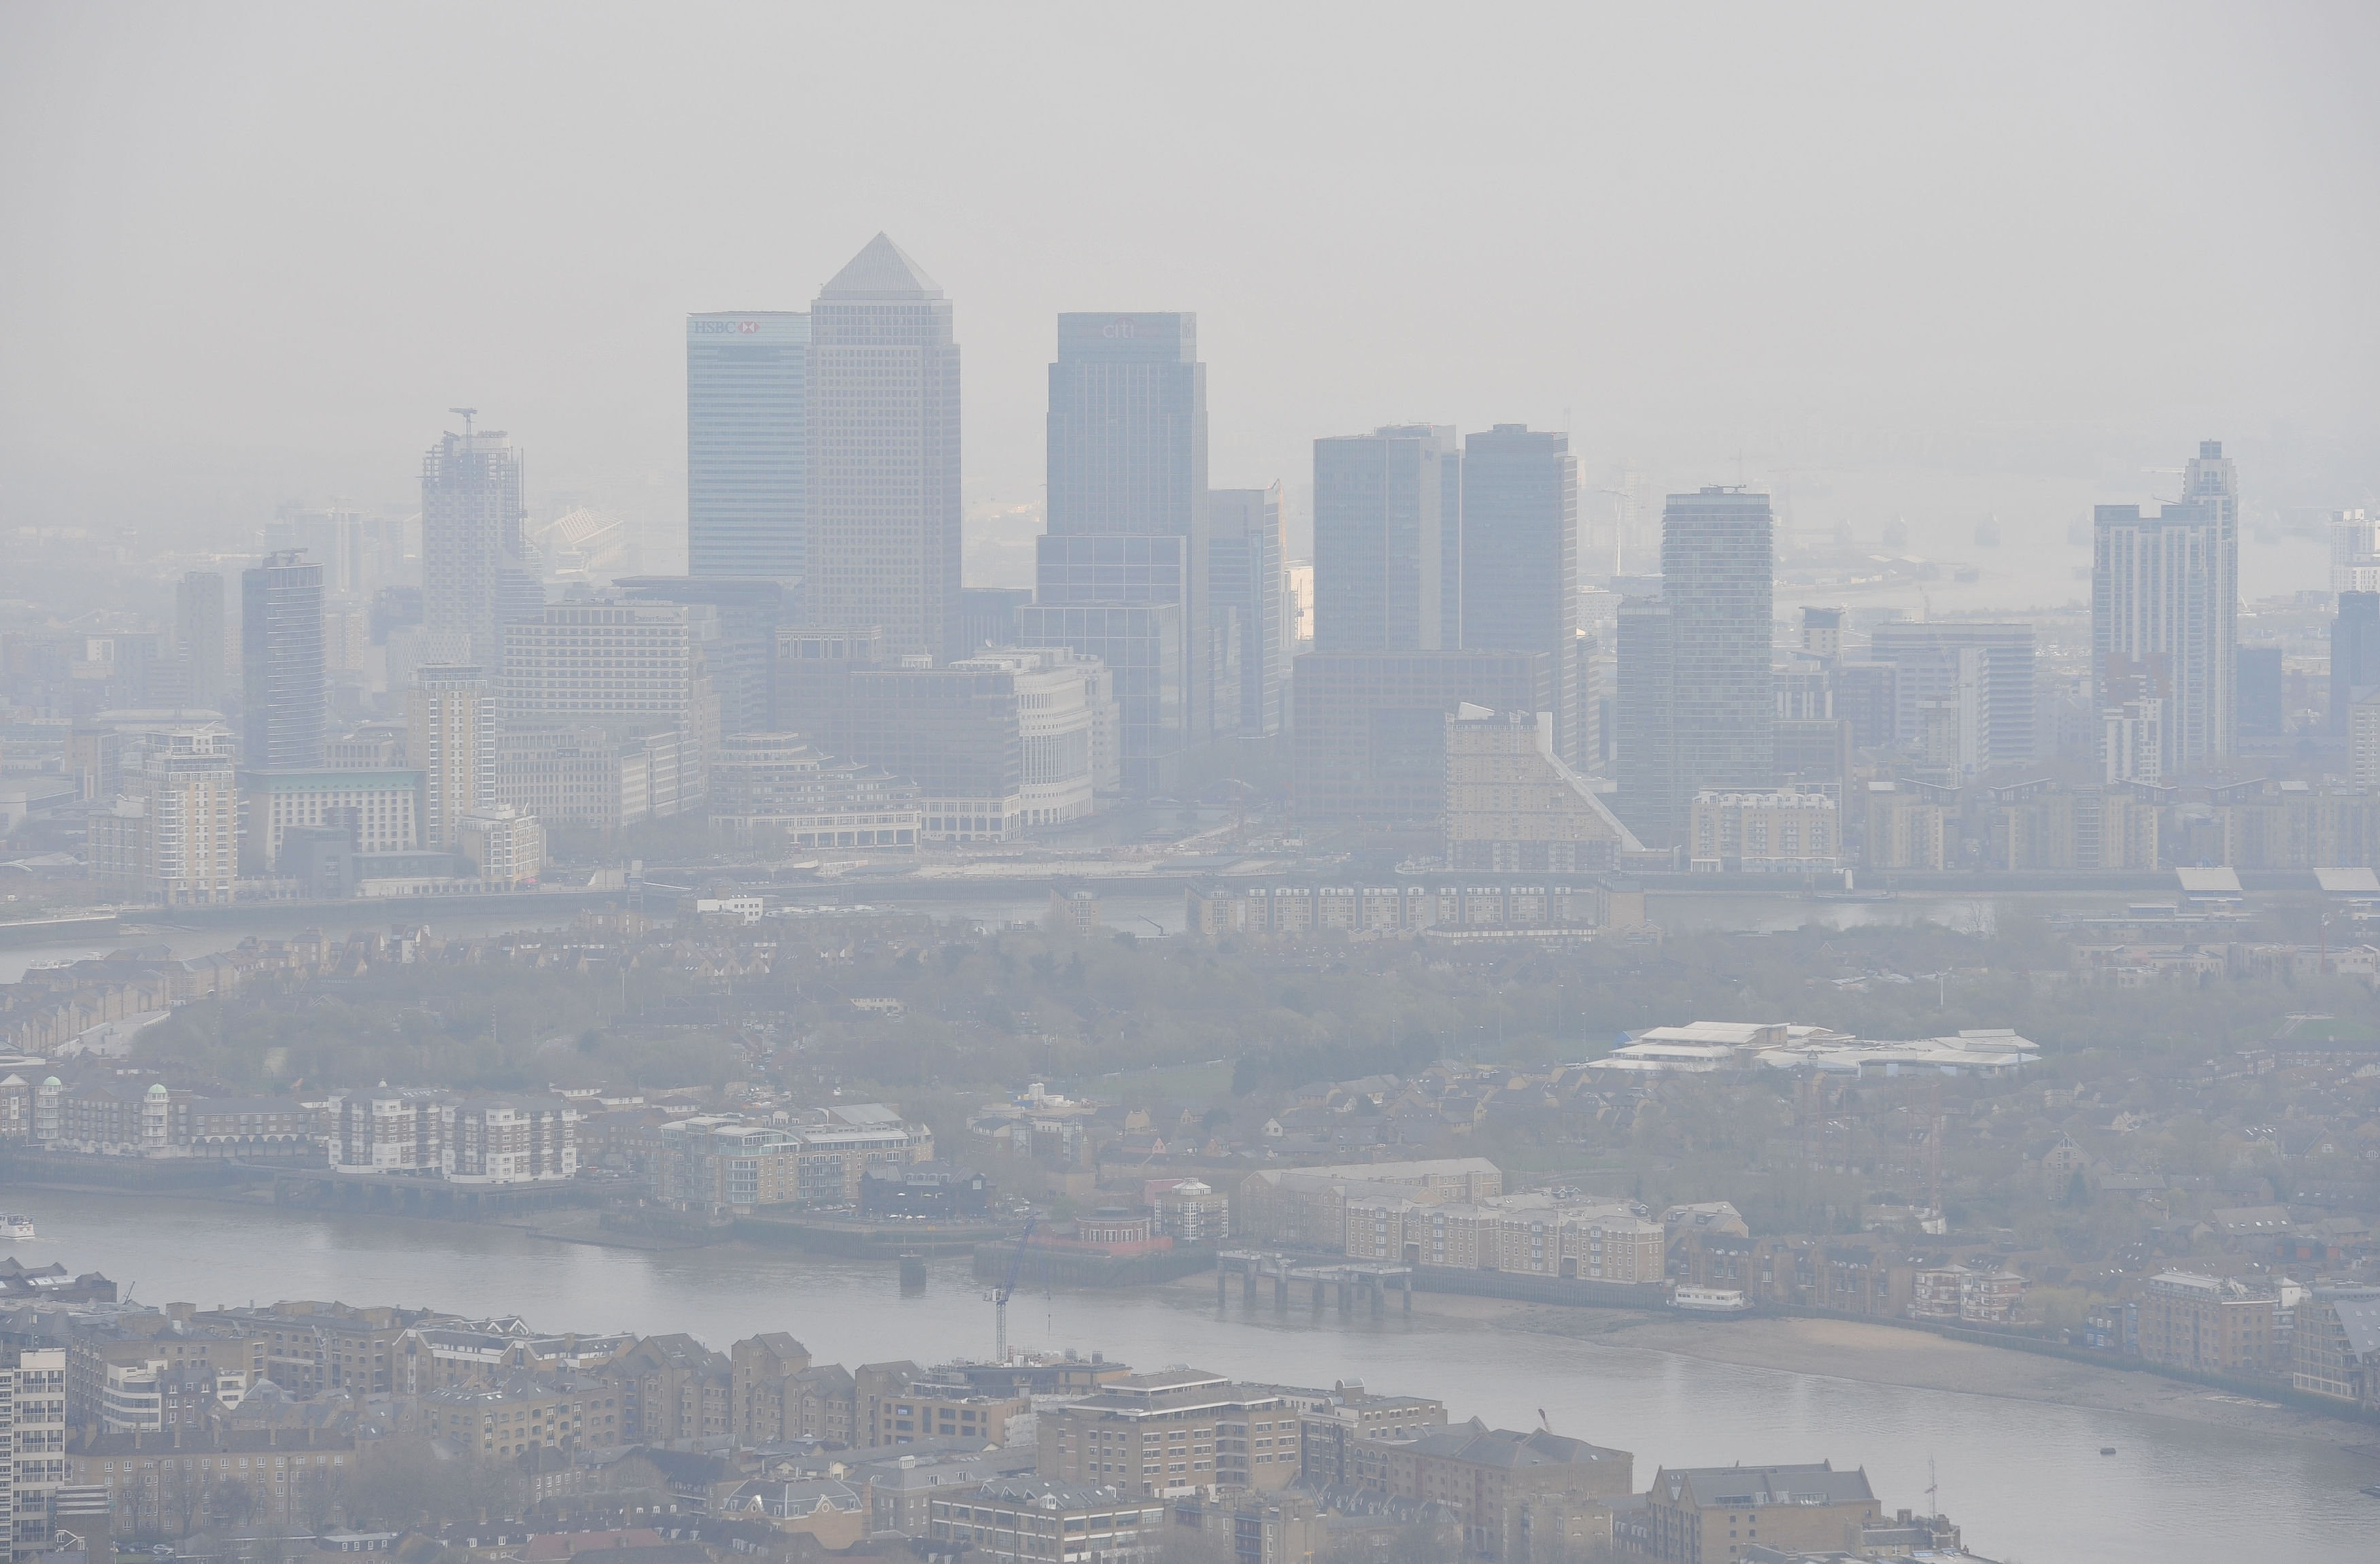 Air pollution from traffic puts unborn babies at health risk